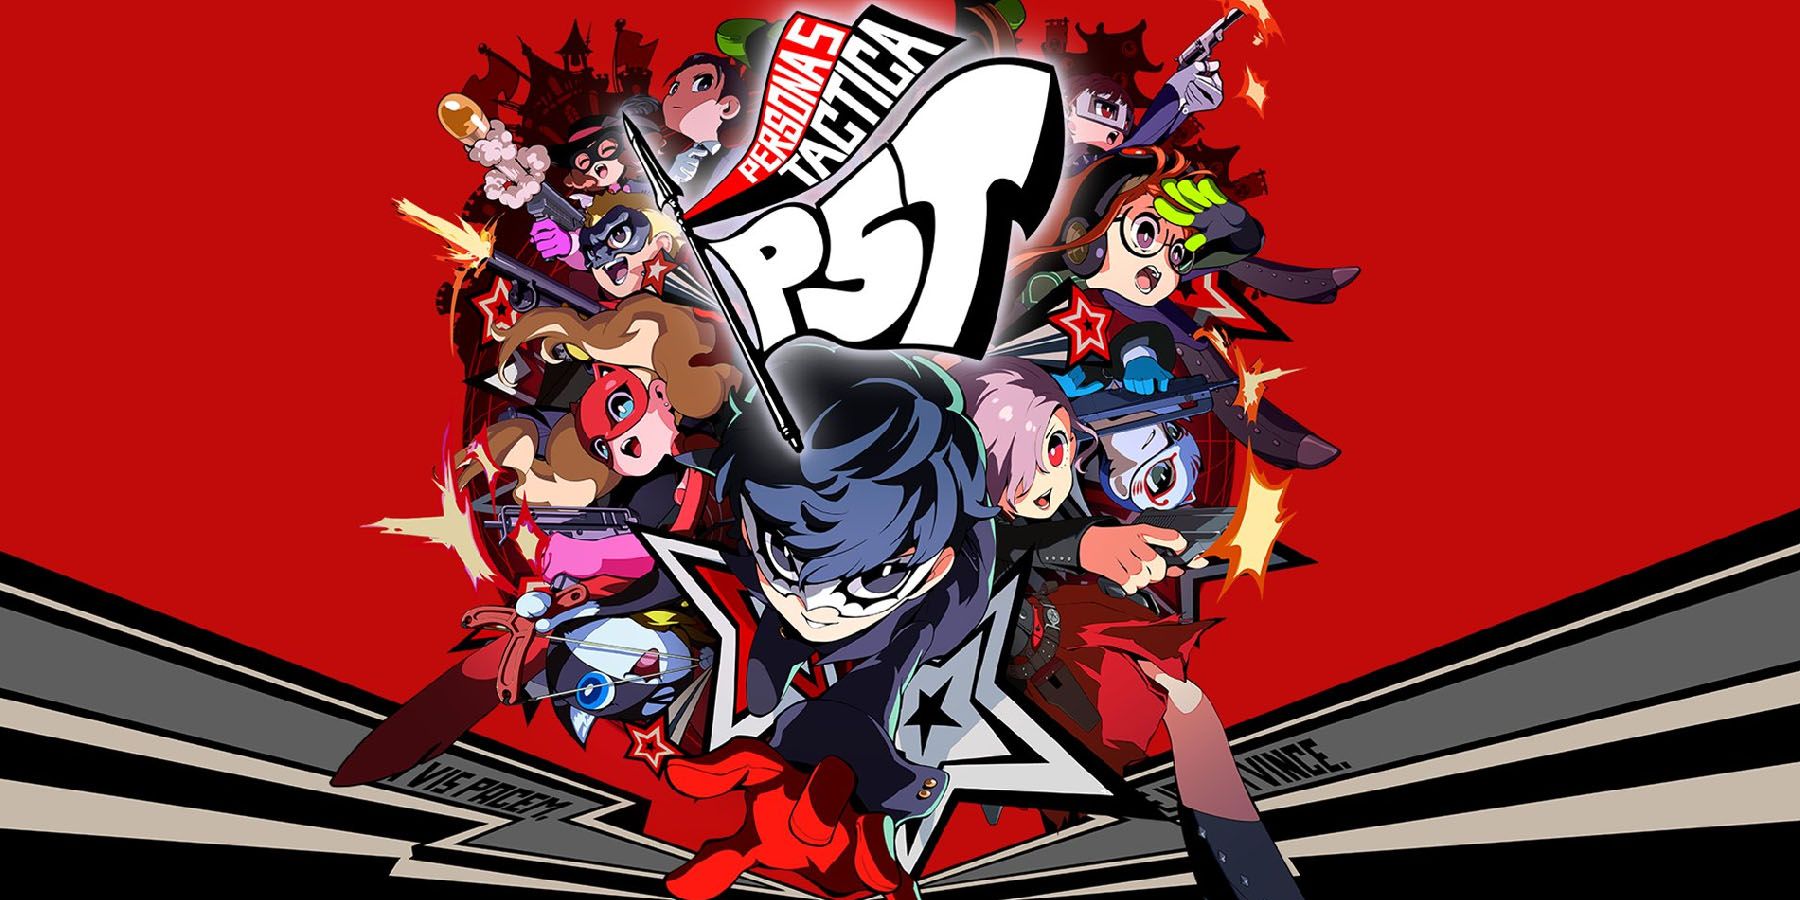 Persona 5 Enthusiasts Brace Themselves: Atlus Blazes A New Trail With  Upcoming P5 Spin-Offs